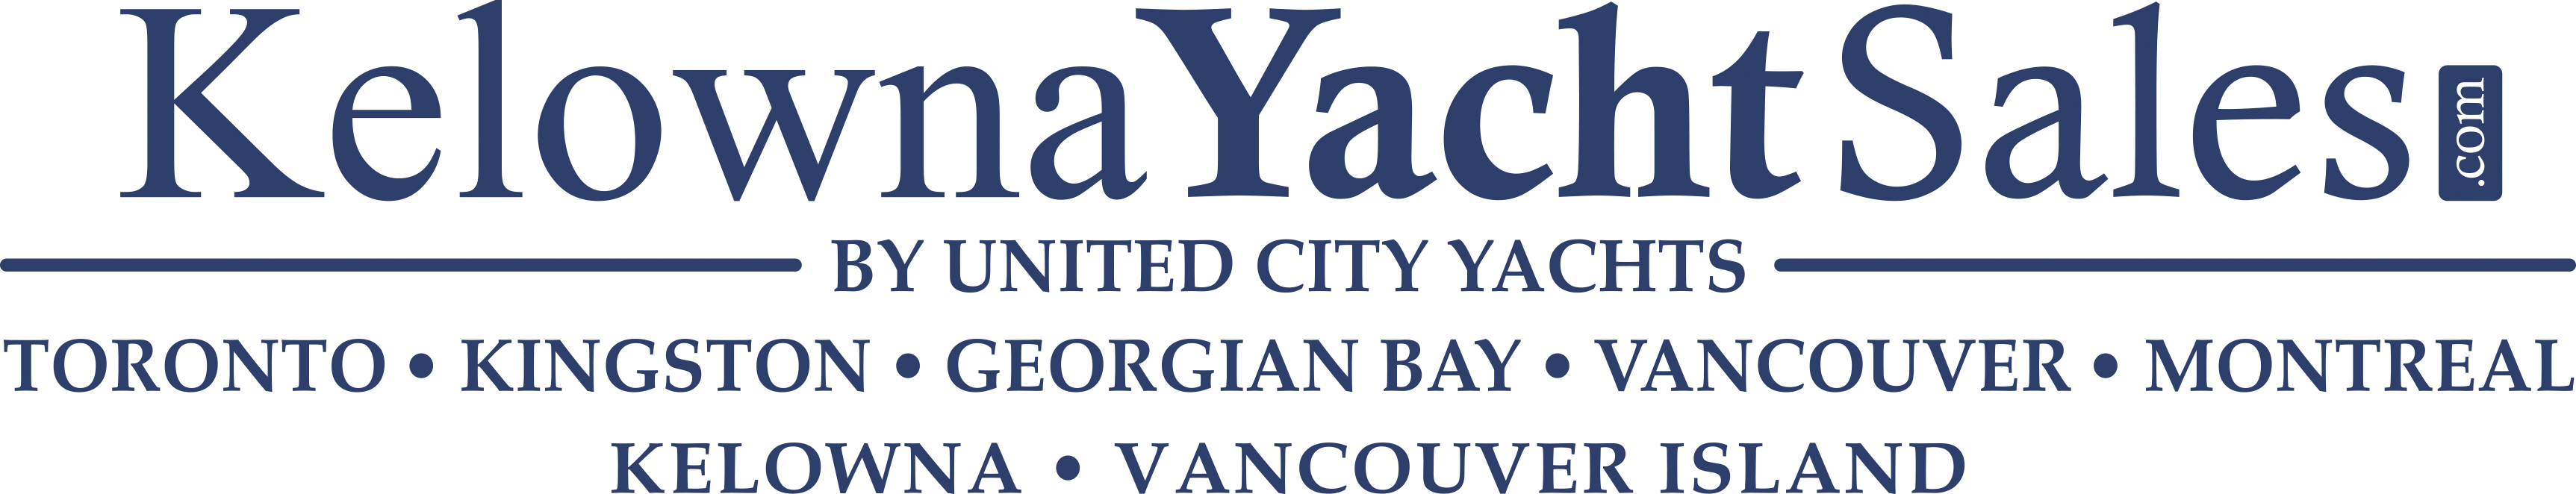 milltown yacht sales vancouver